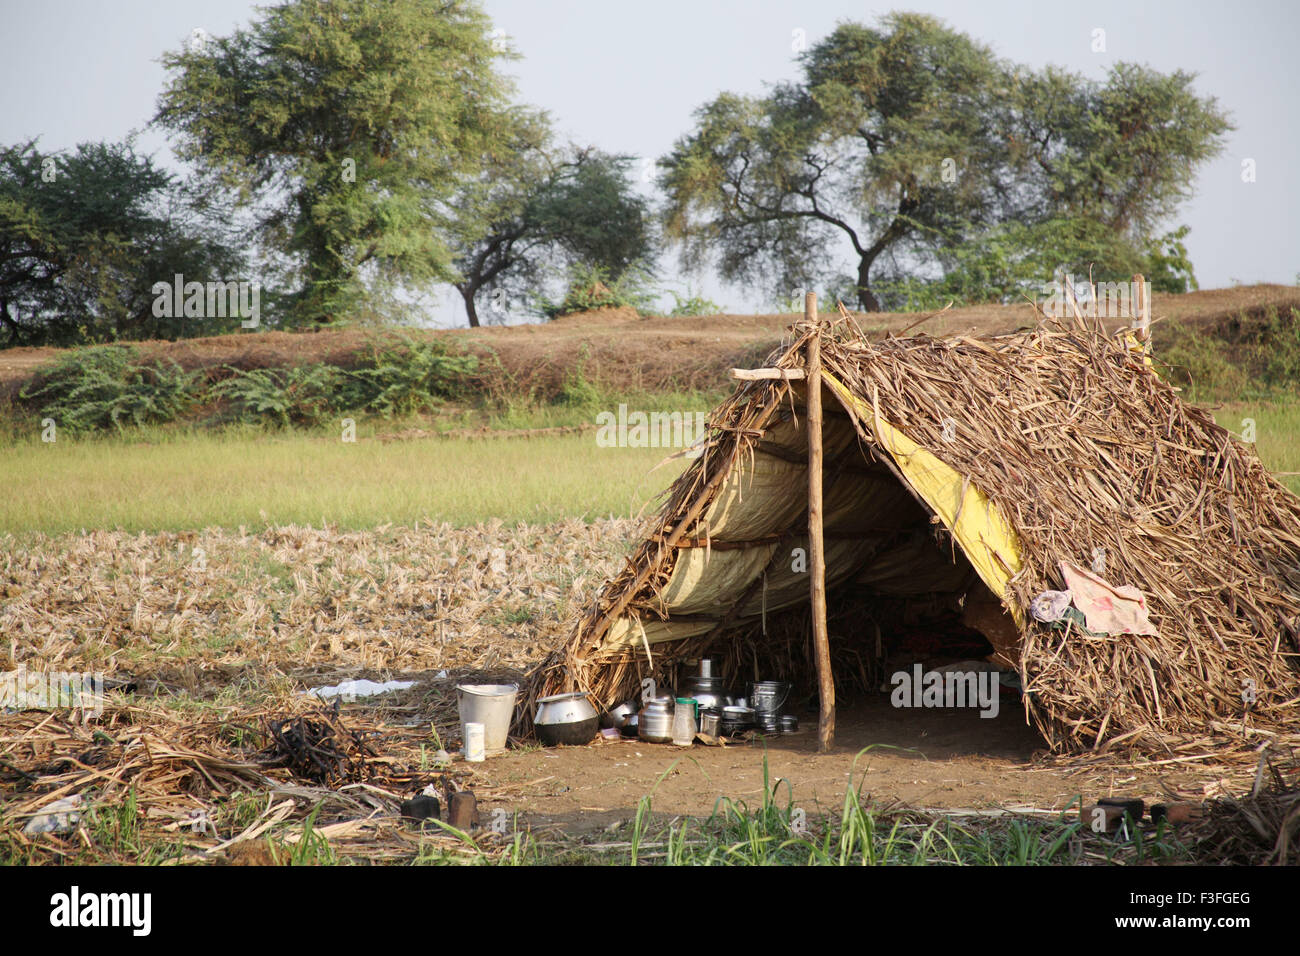 Hut ; temporary arrangement made for shelter near the fields during harvesting season ; Tamil Nadu ; India Stock Photo